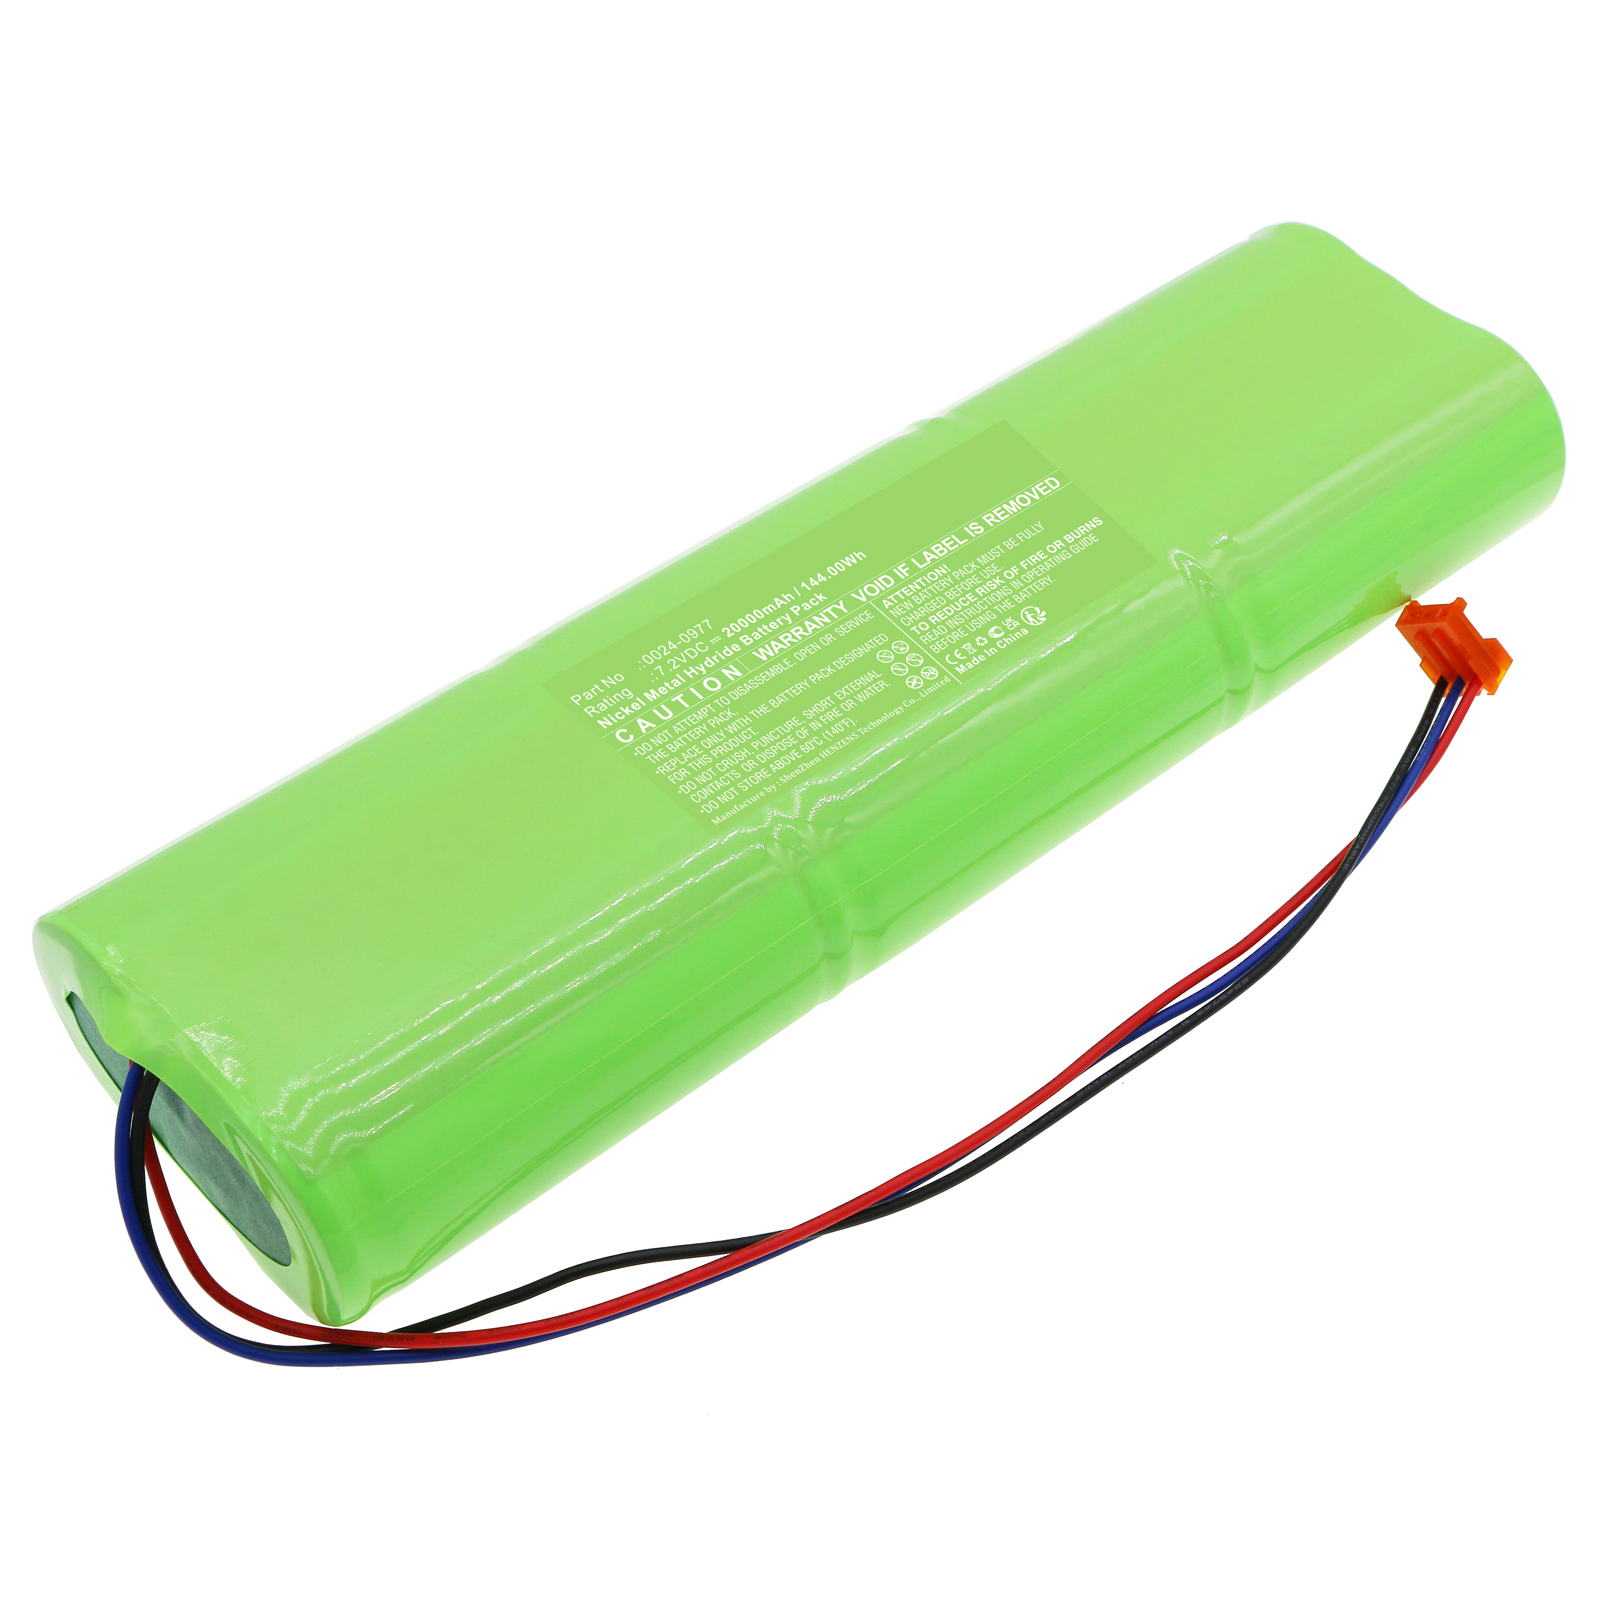 Synergy Digital Equipment Battery, Compatible with Bacharach 0024-0977 Equipment Battery (Ni-MH, 7.2V, 20000mAh)